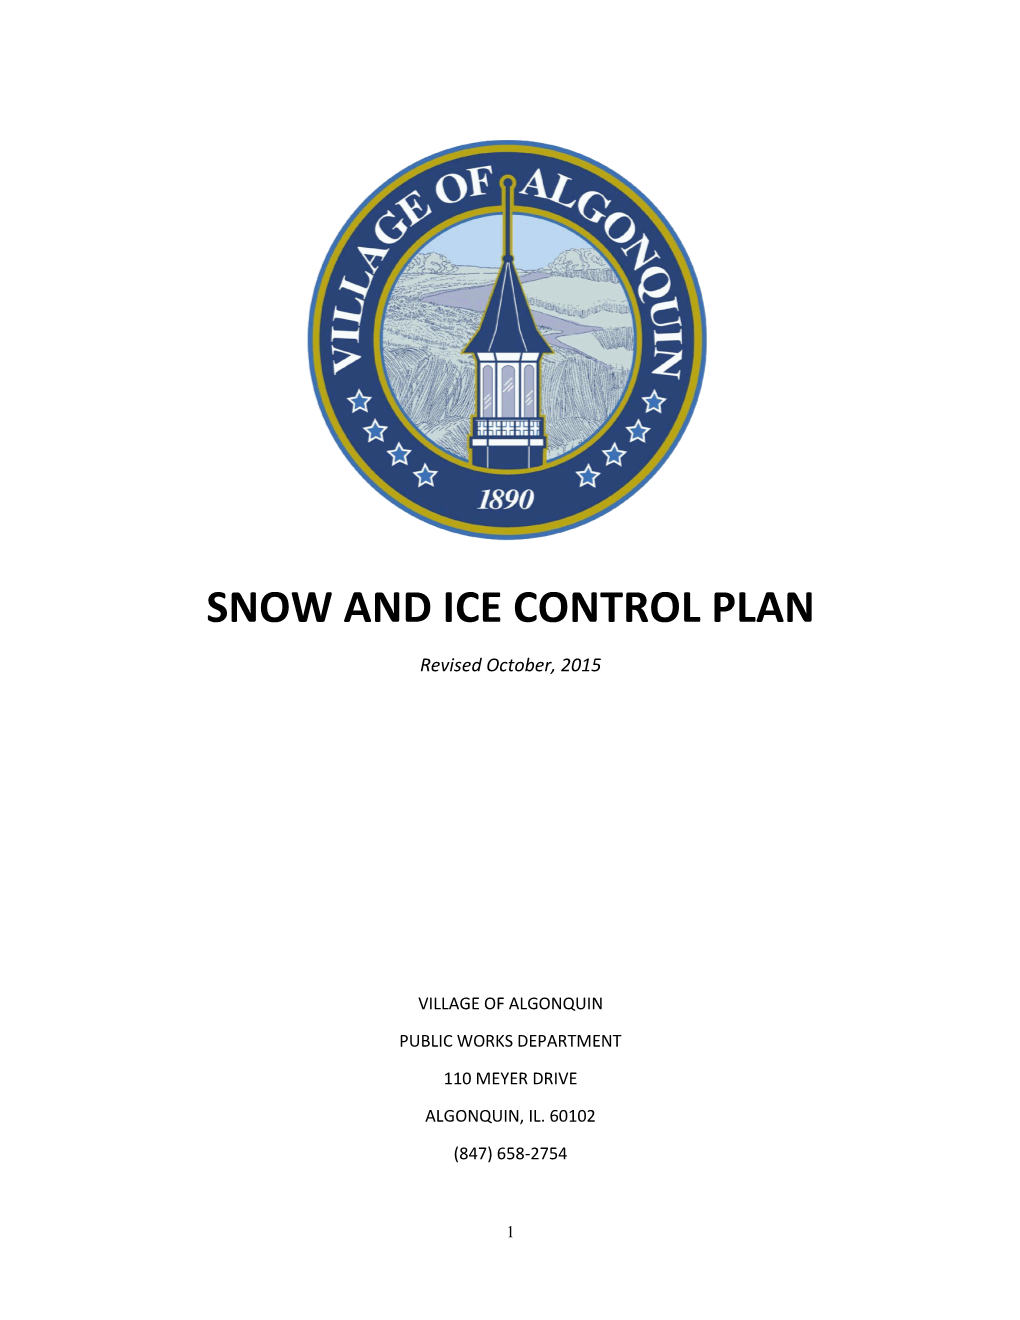 Snow and Ice Control Plan